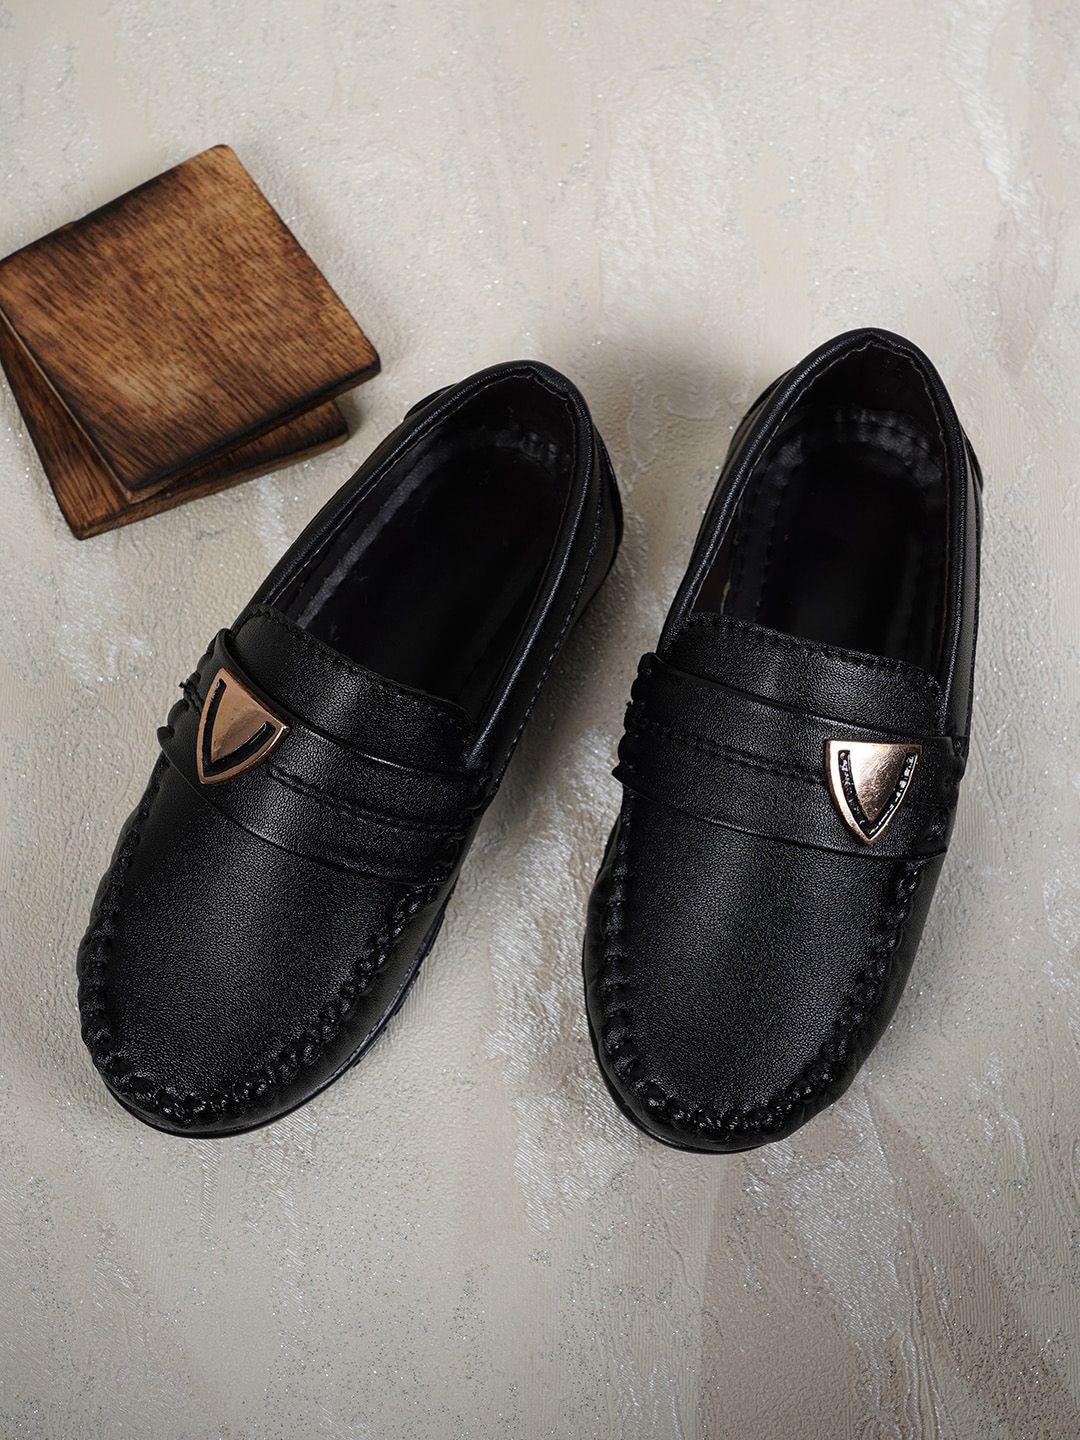 style-shoes-boys-textured-round-toe-loafers